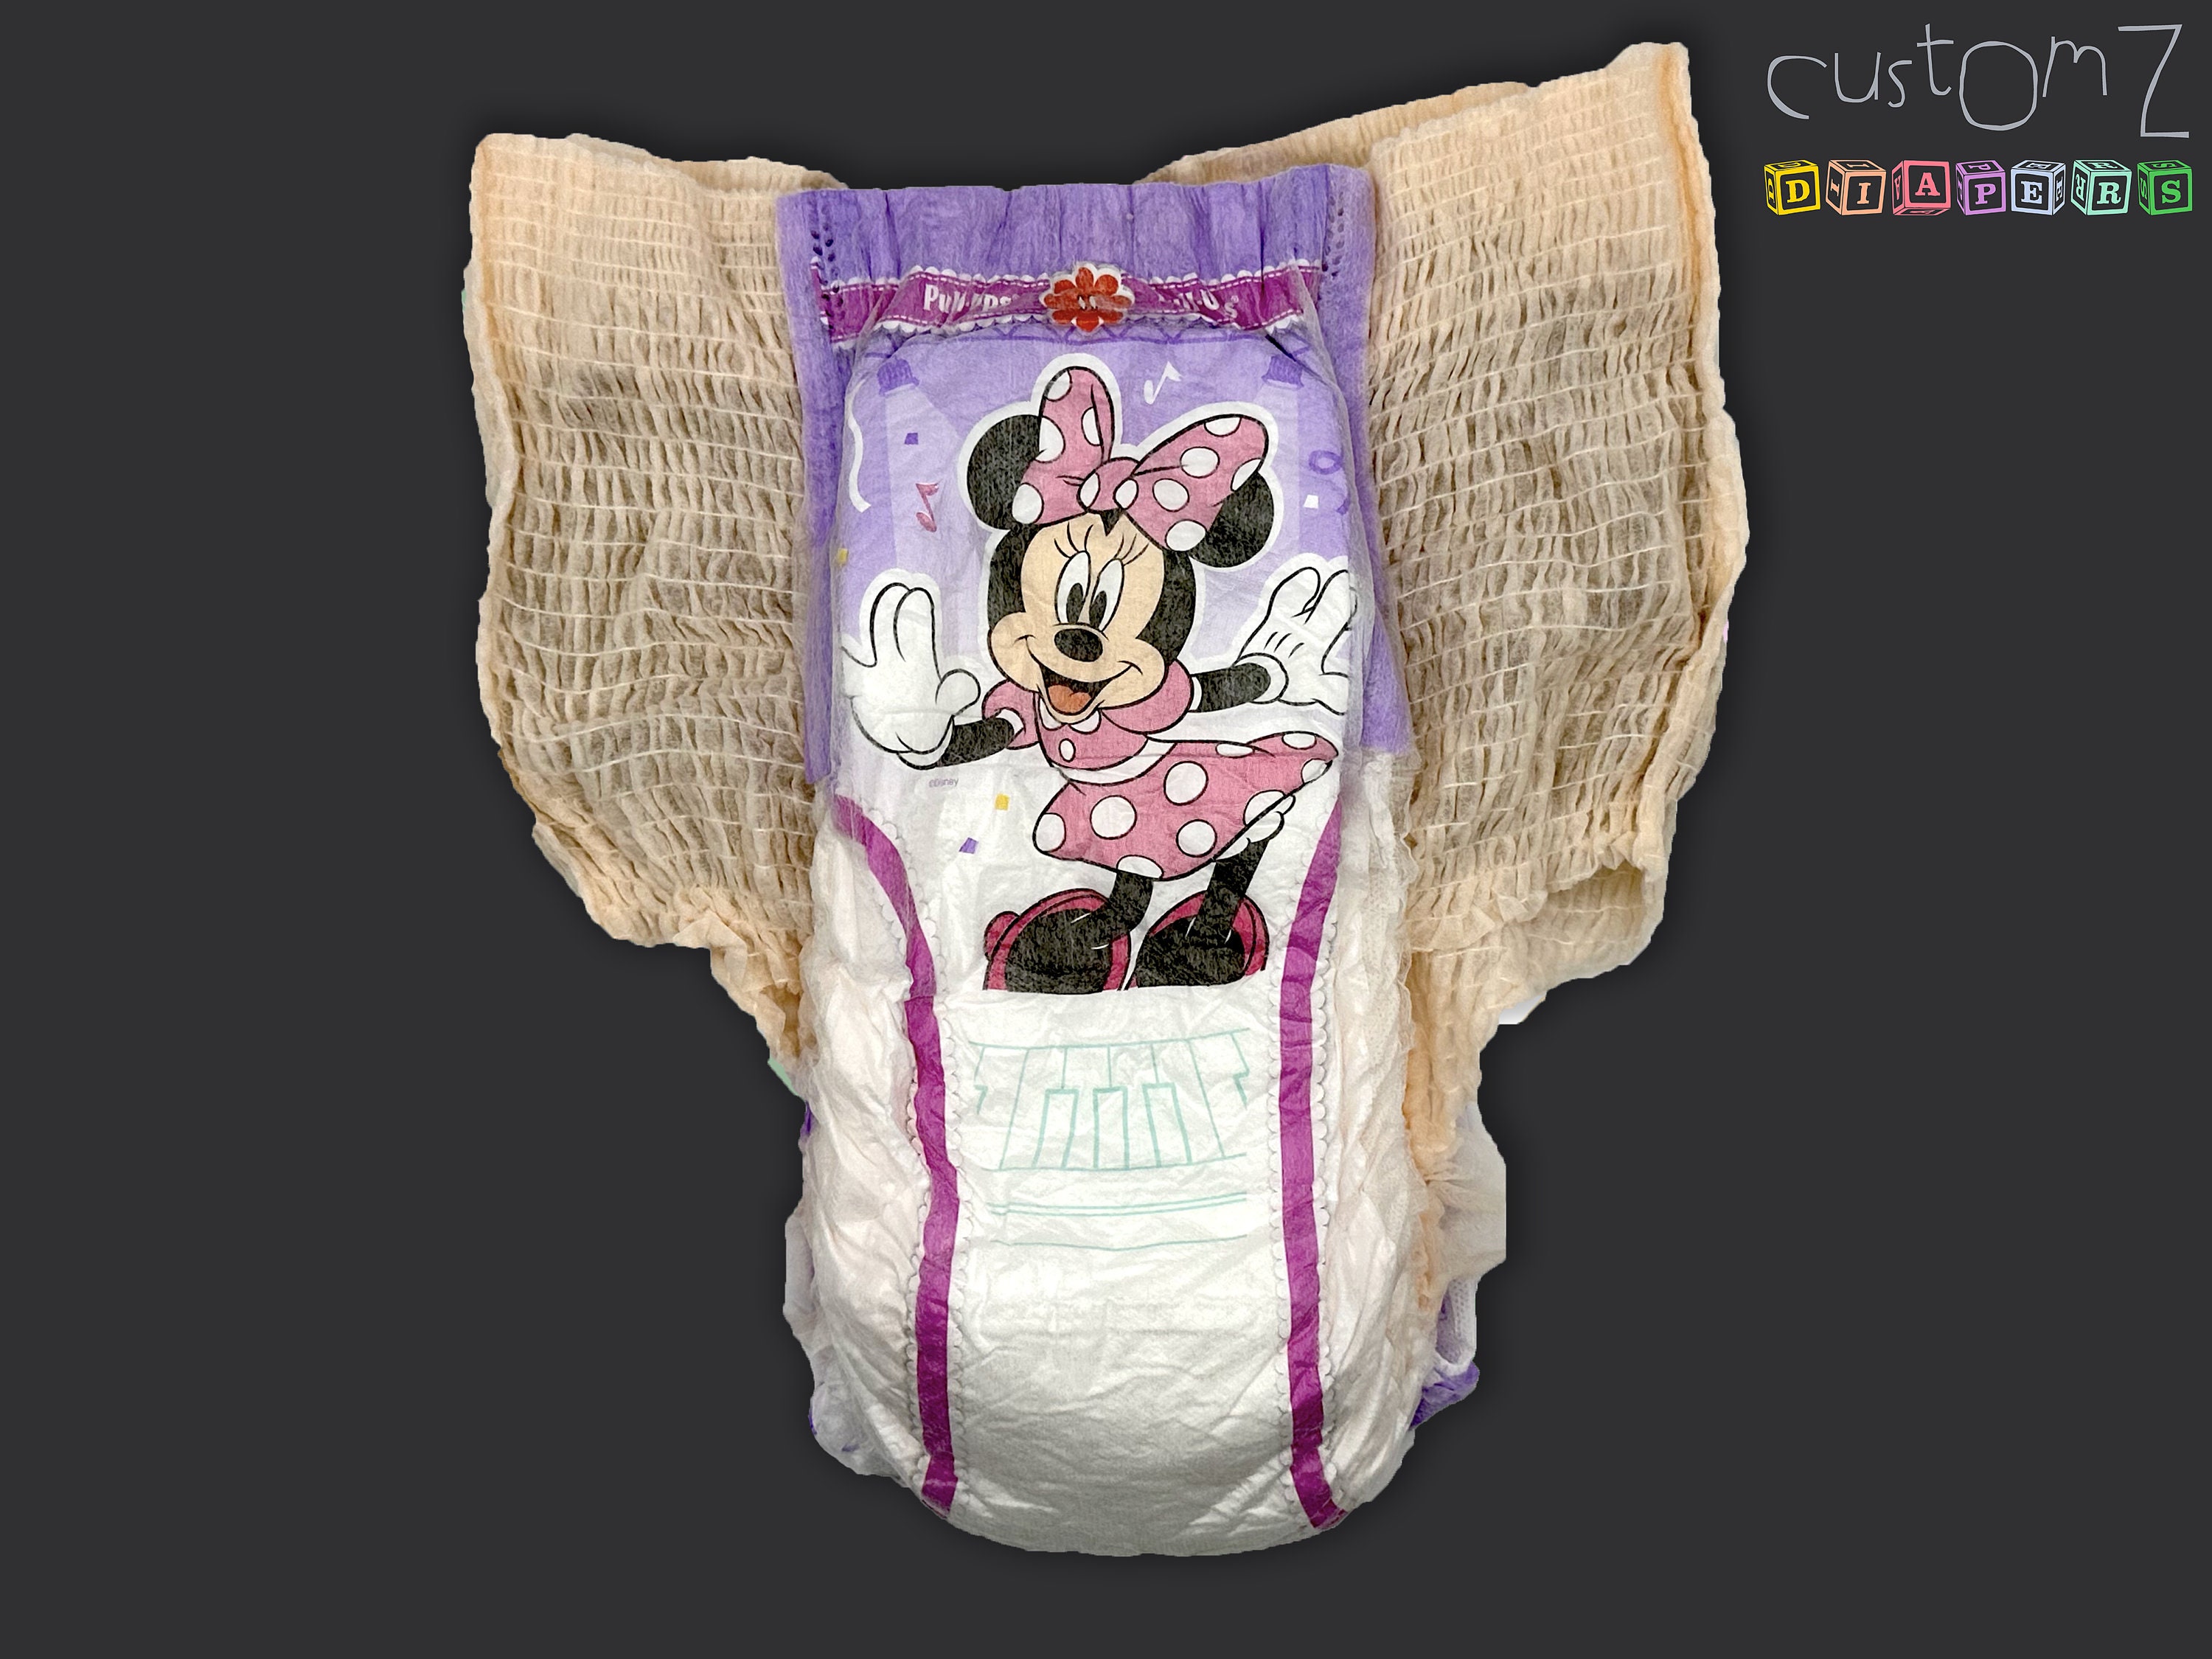 Customz Mr Mouse ABDL Adult Baby Pull up Diaper 1 X Pull up Nappy 